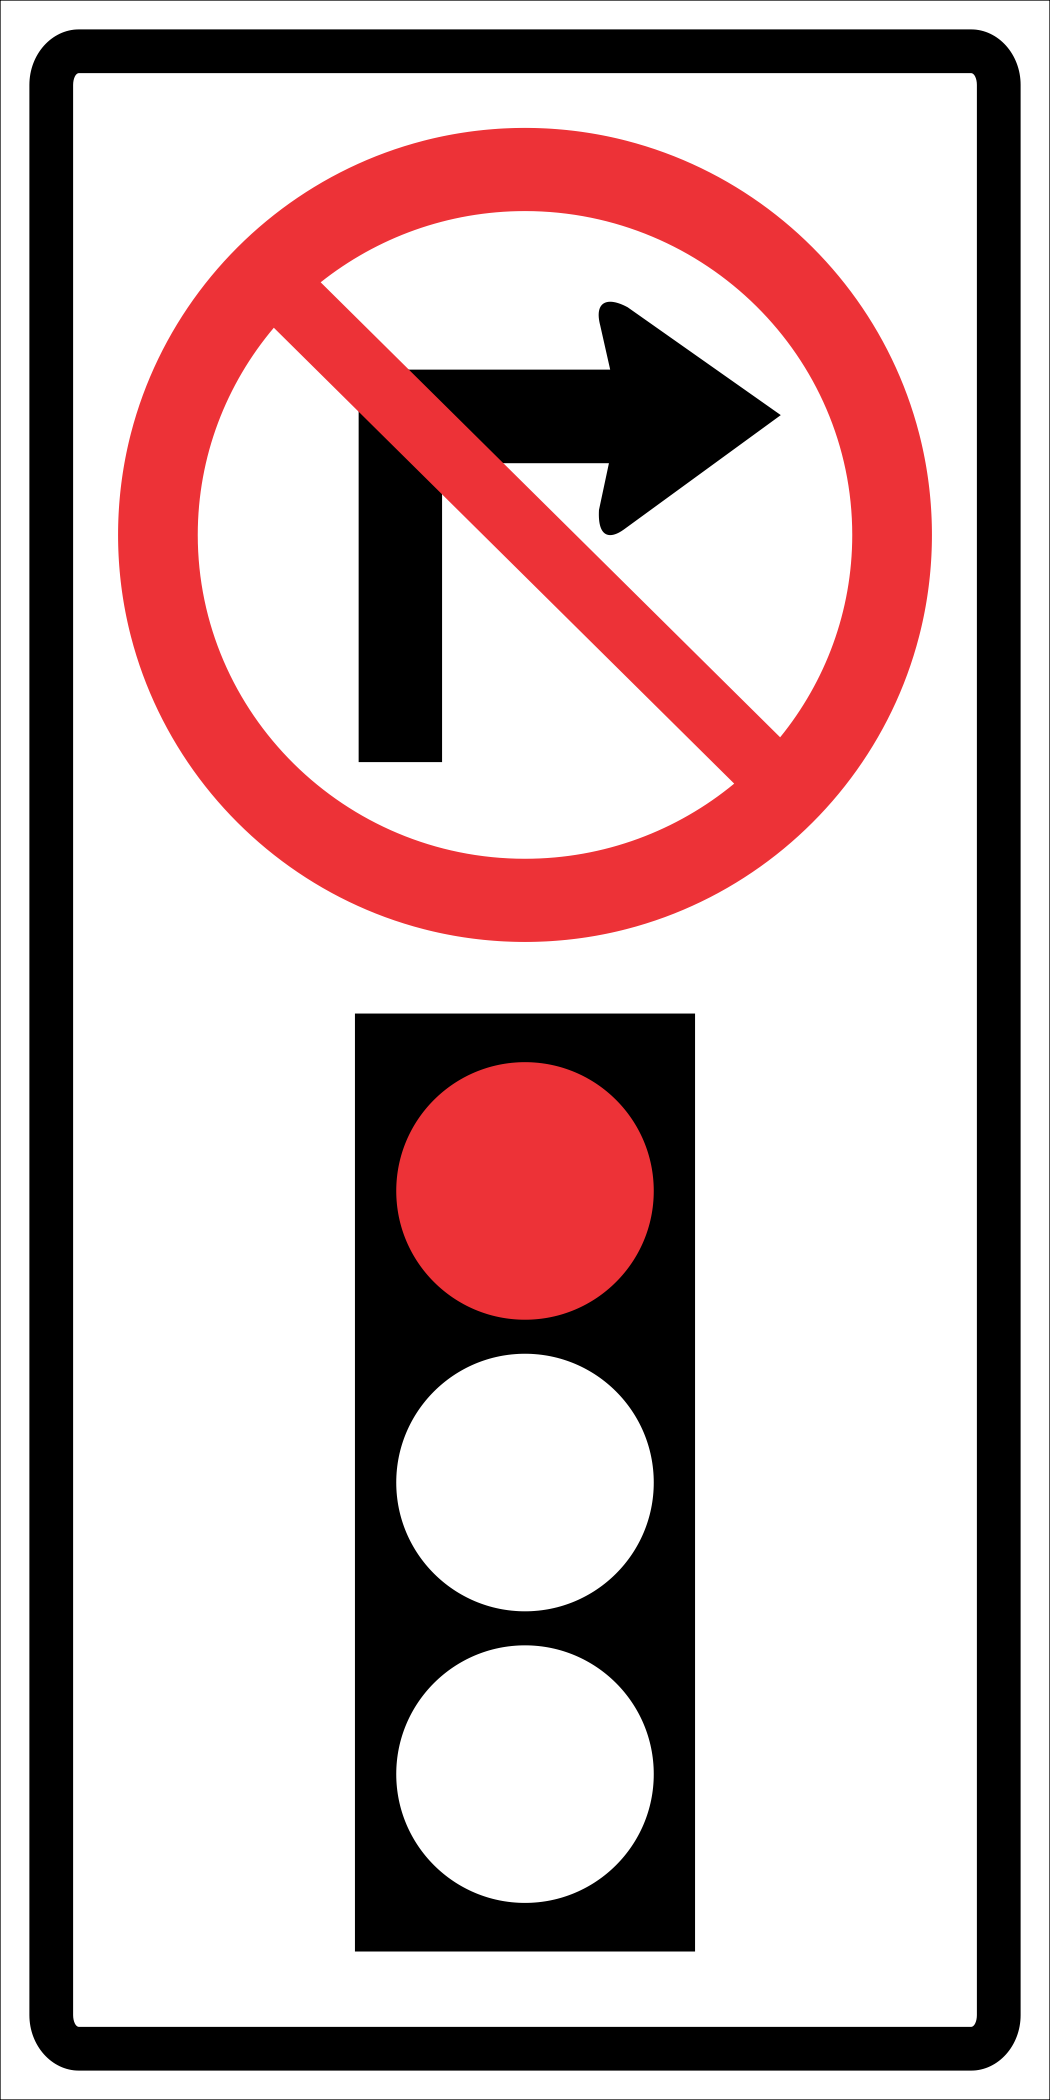 Right Turn On Red Traffic Signal Prohibited Sign MUTCDC RB-17R